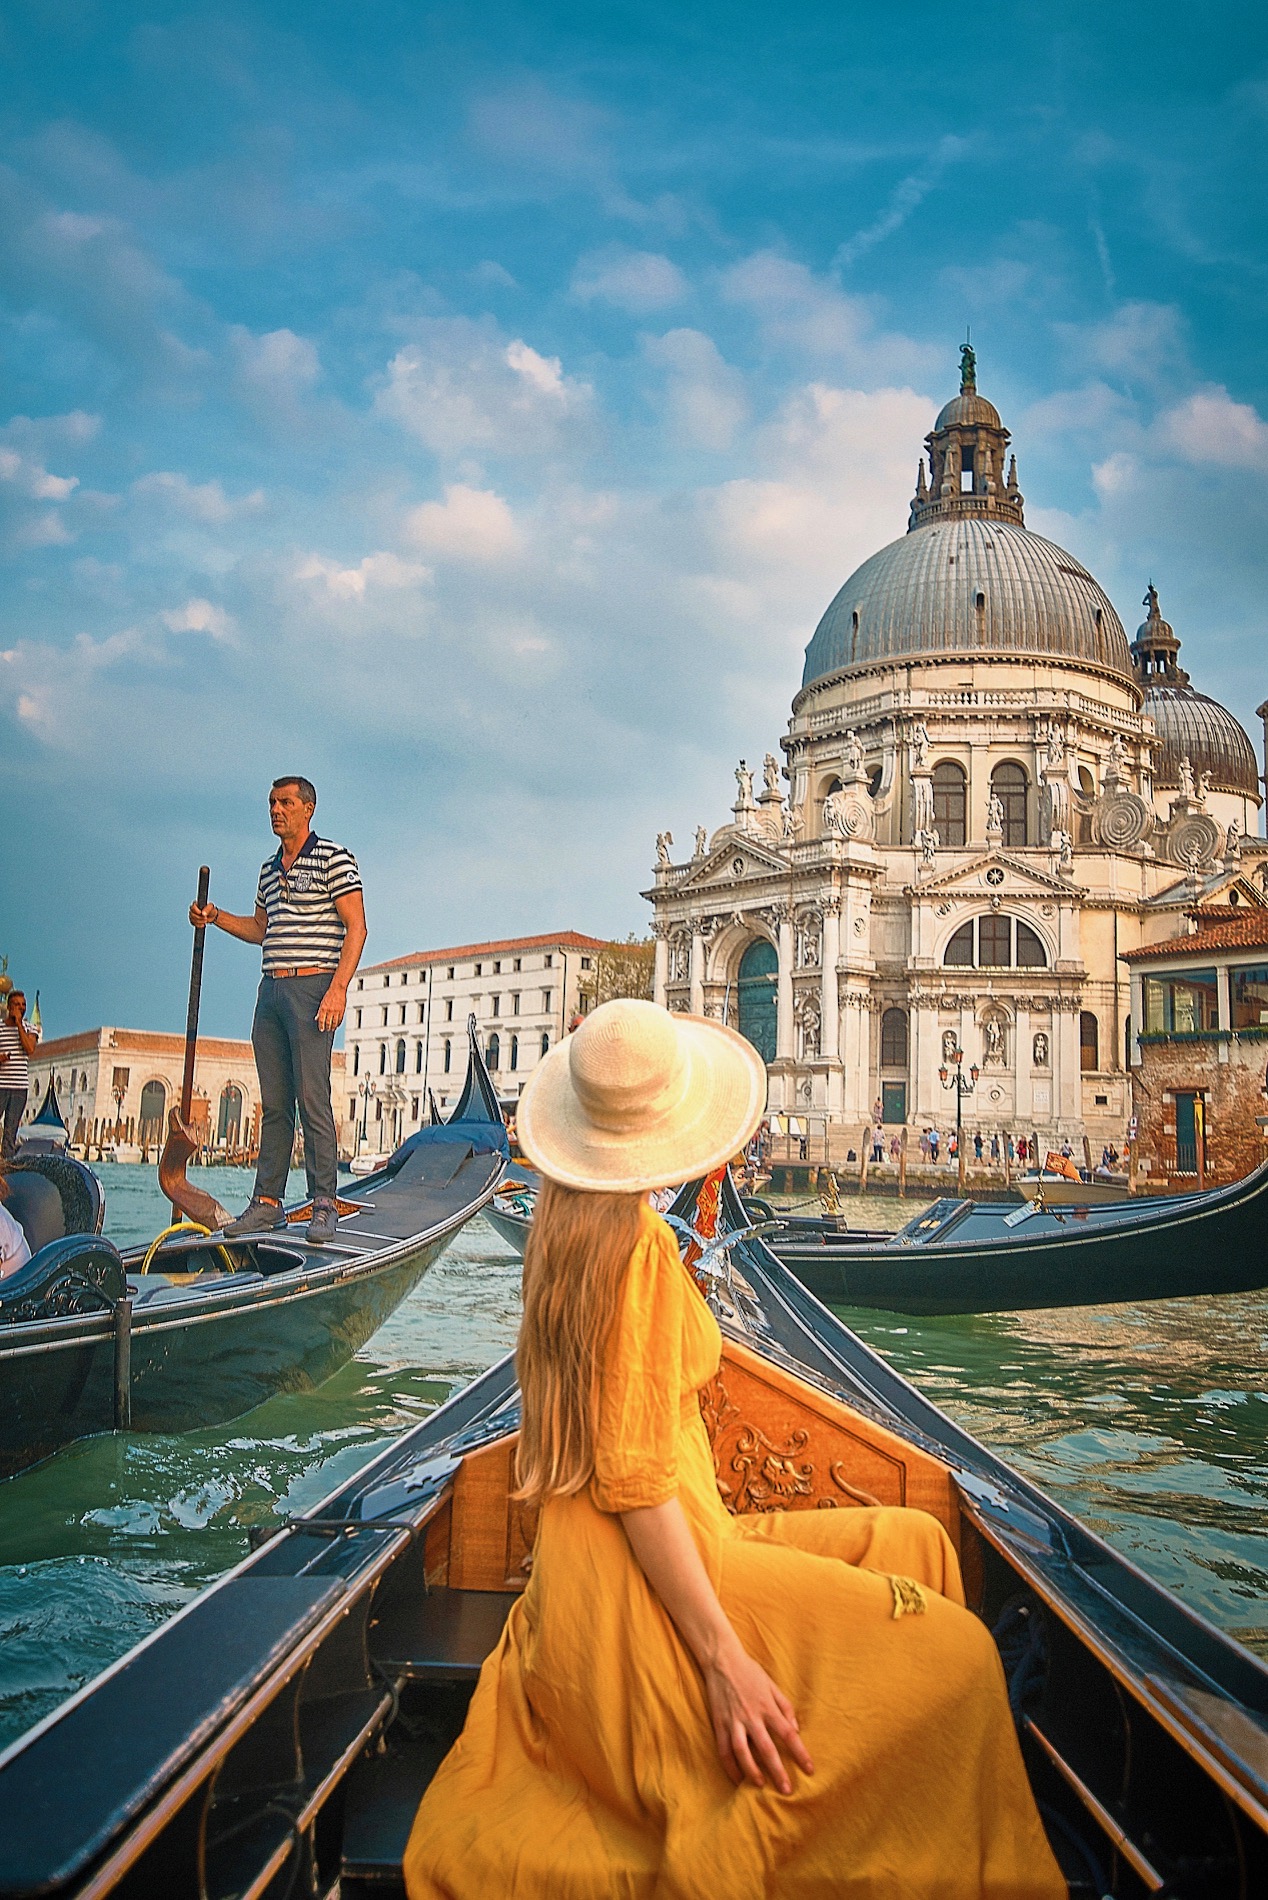 a woman in a hat and a long dress is sitting on a gondola in a canal in Venice Italy, building can be seen in the background 